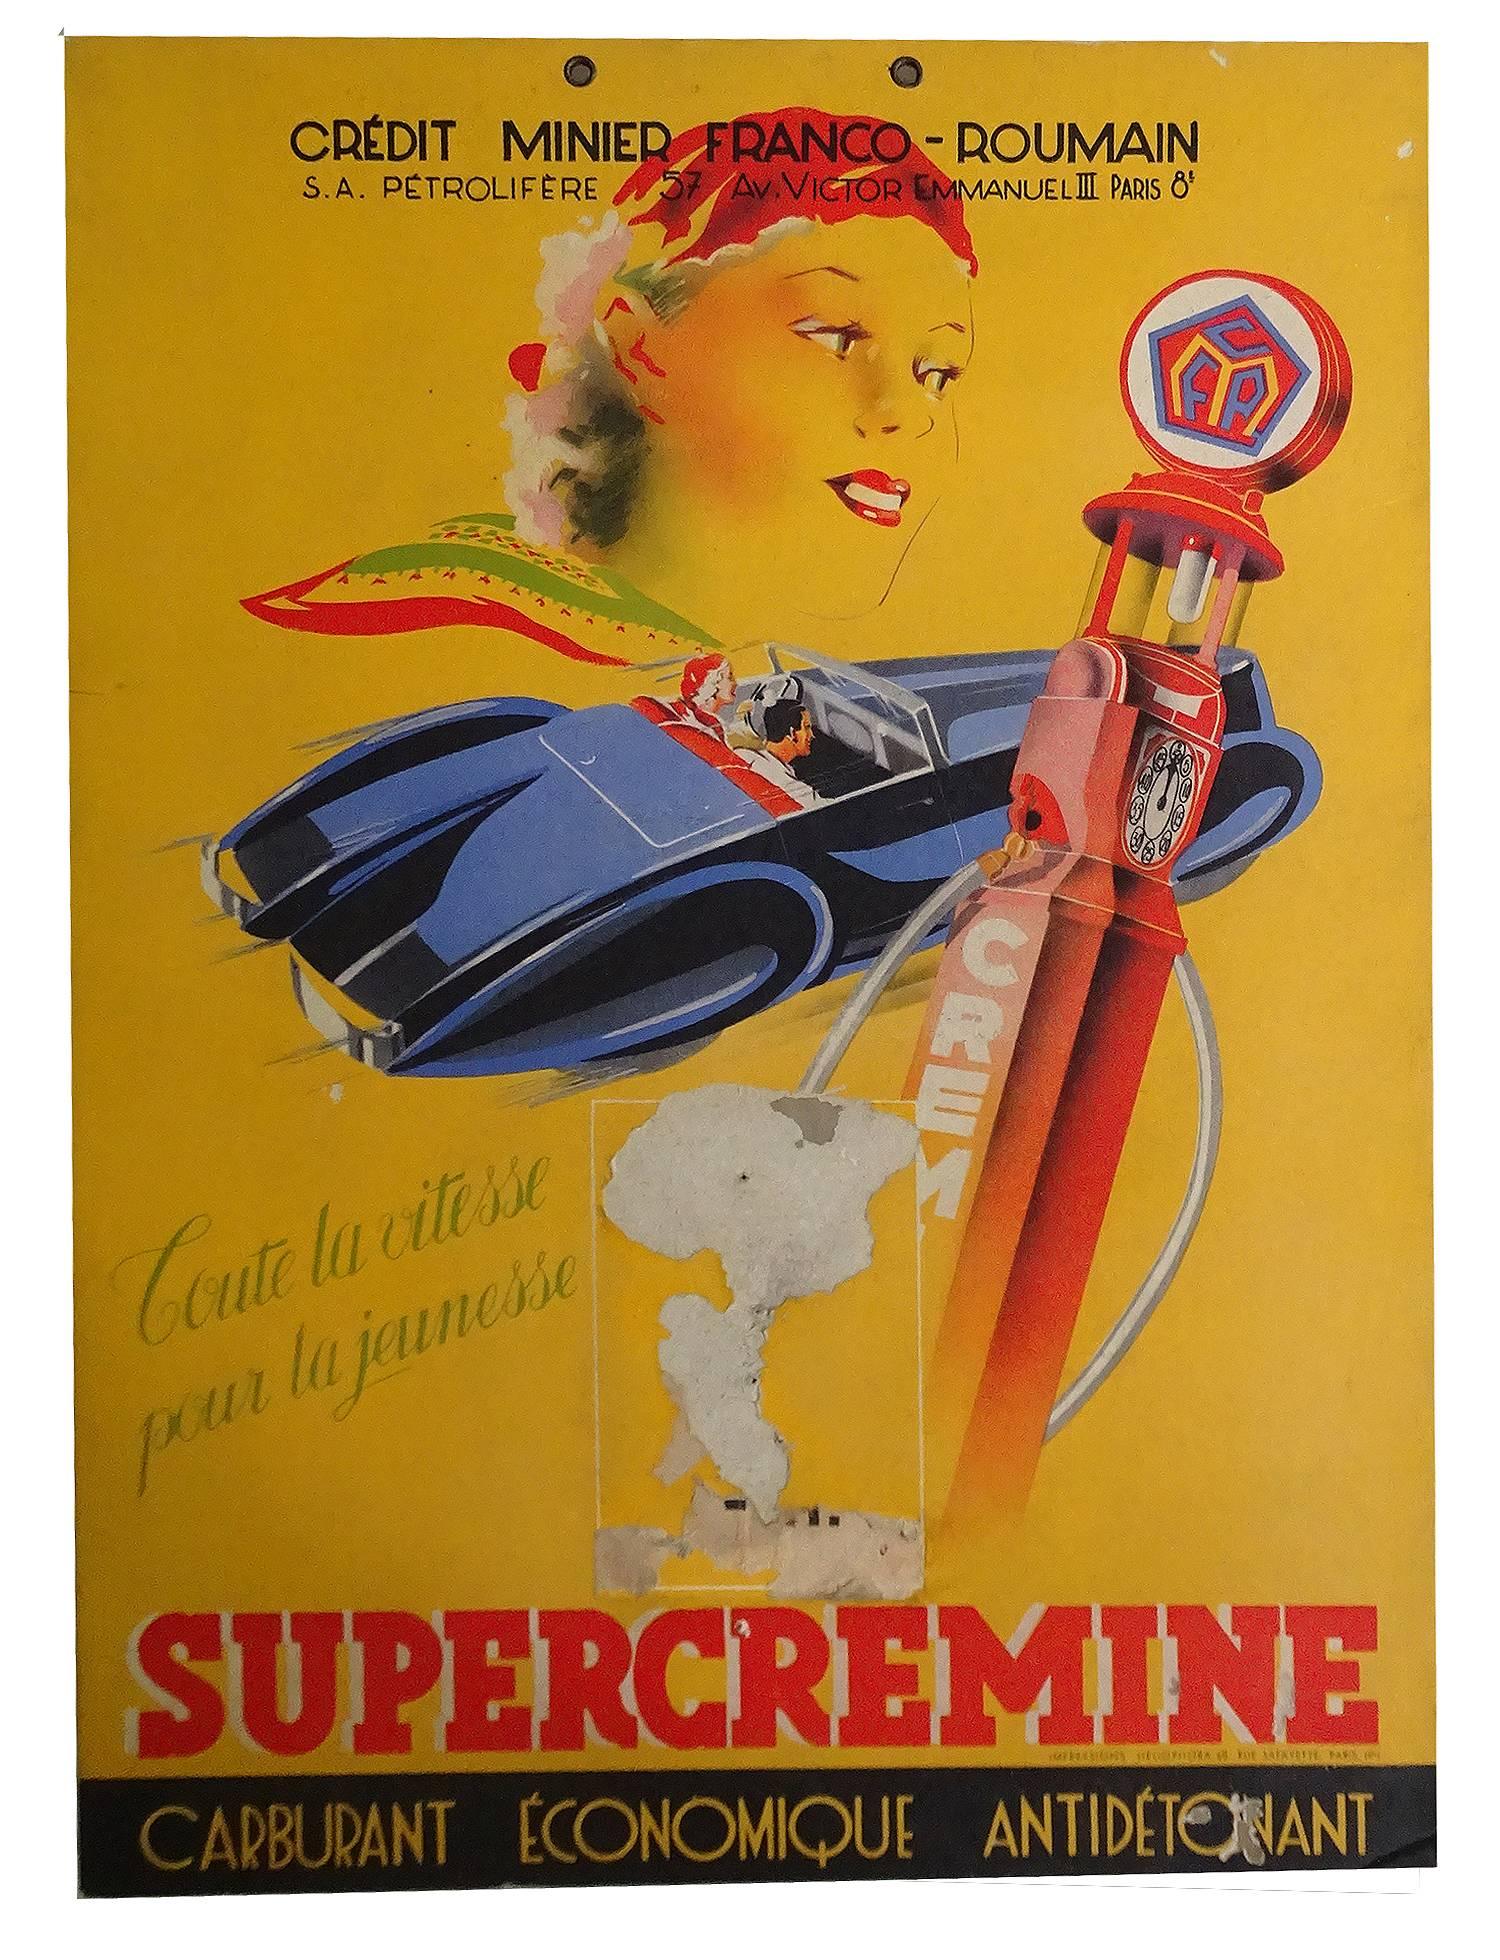 Extremely rare wall calendar display poster for the credit minier franco-roumain, France, circa 1938, featuring a Figoni styled Delahaye, there used to be tear-down calendar in the middle, great color and graphics.